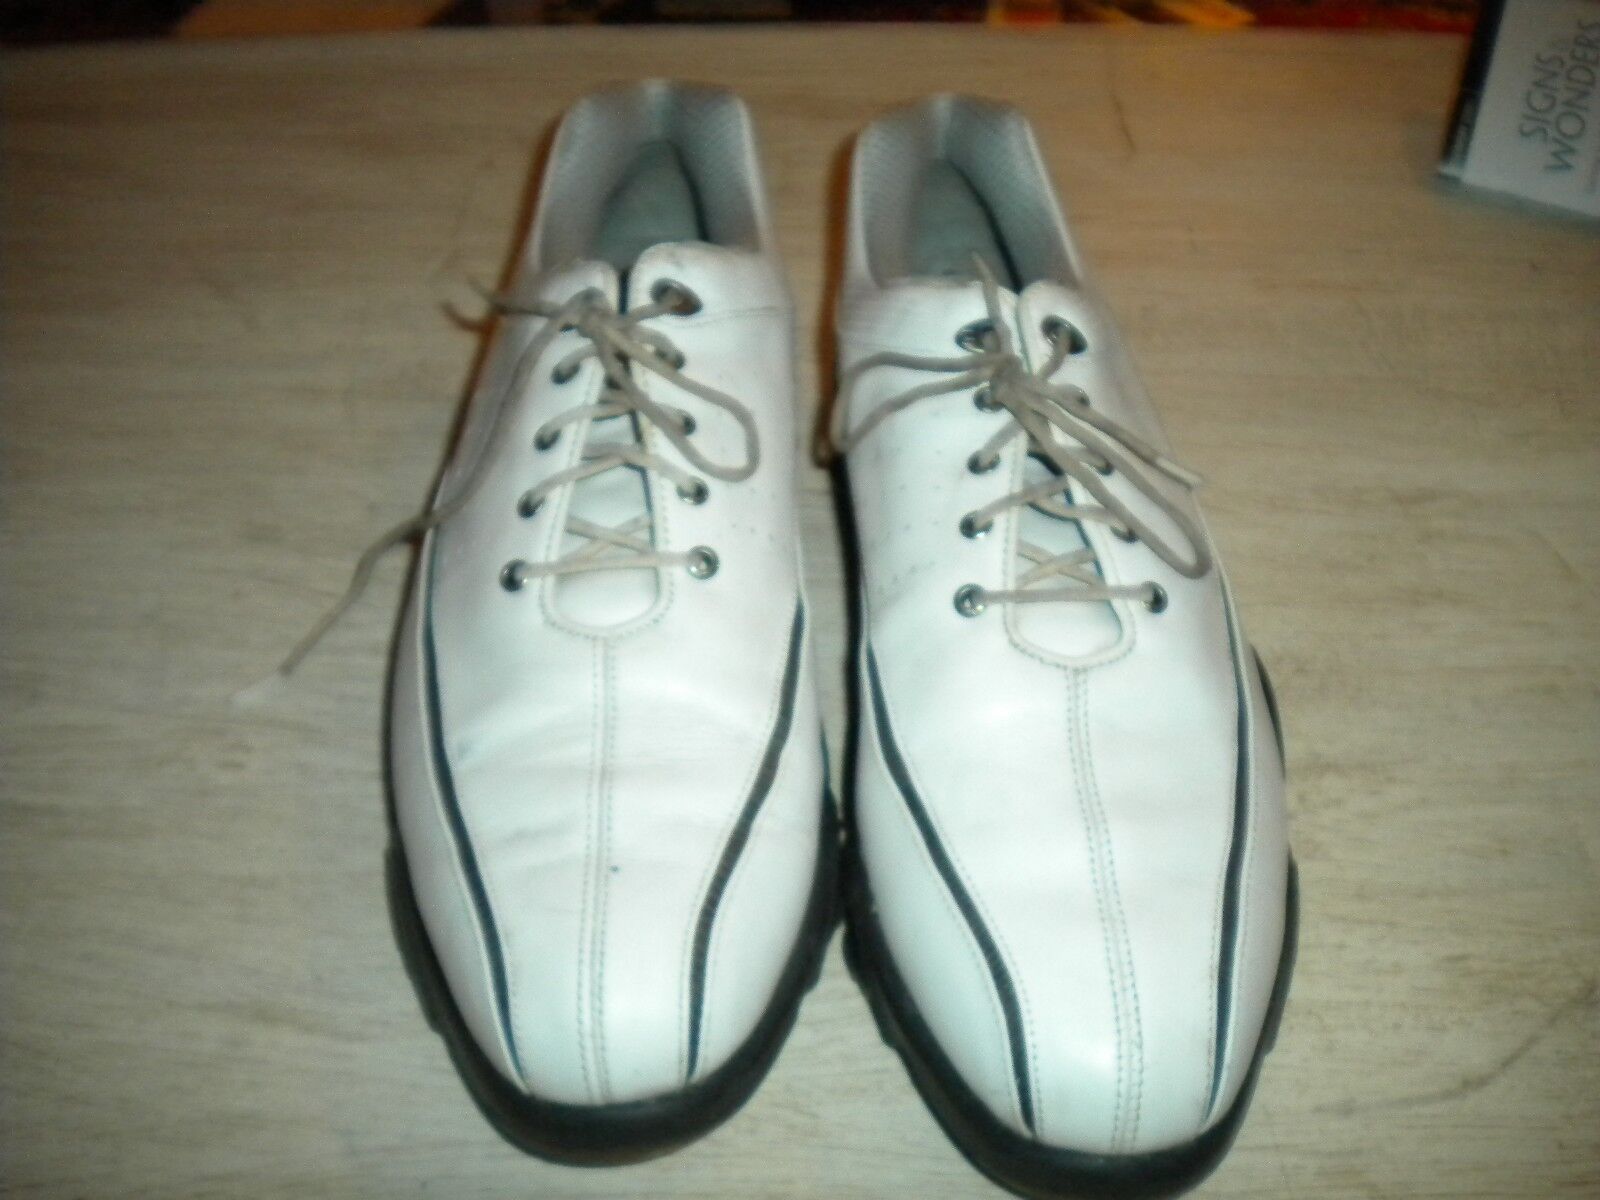 Footjoy Synr-G White Leather Memory Foam Golf Shoes 11.5 M